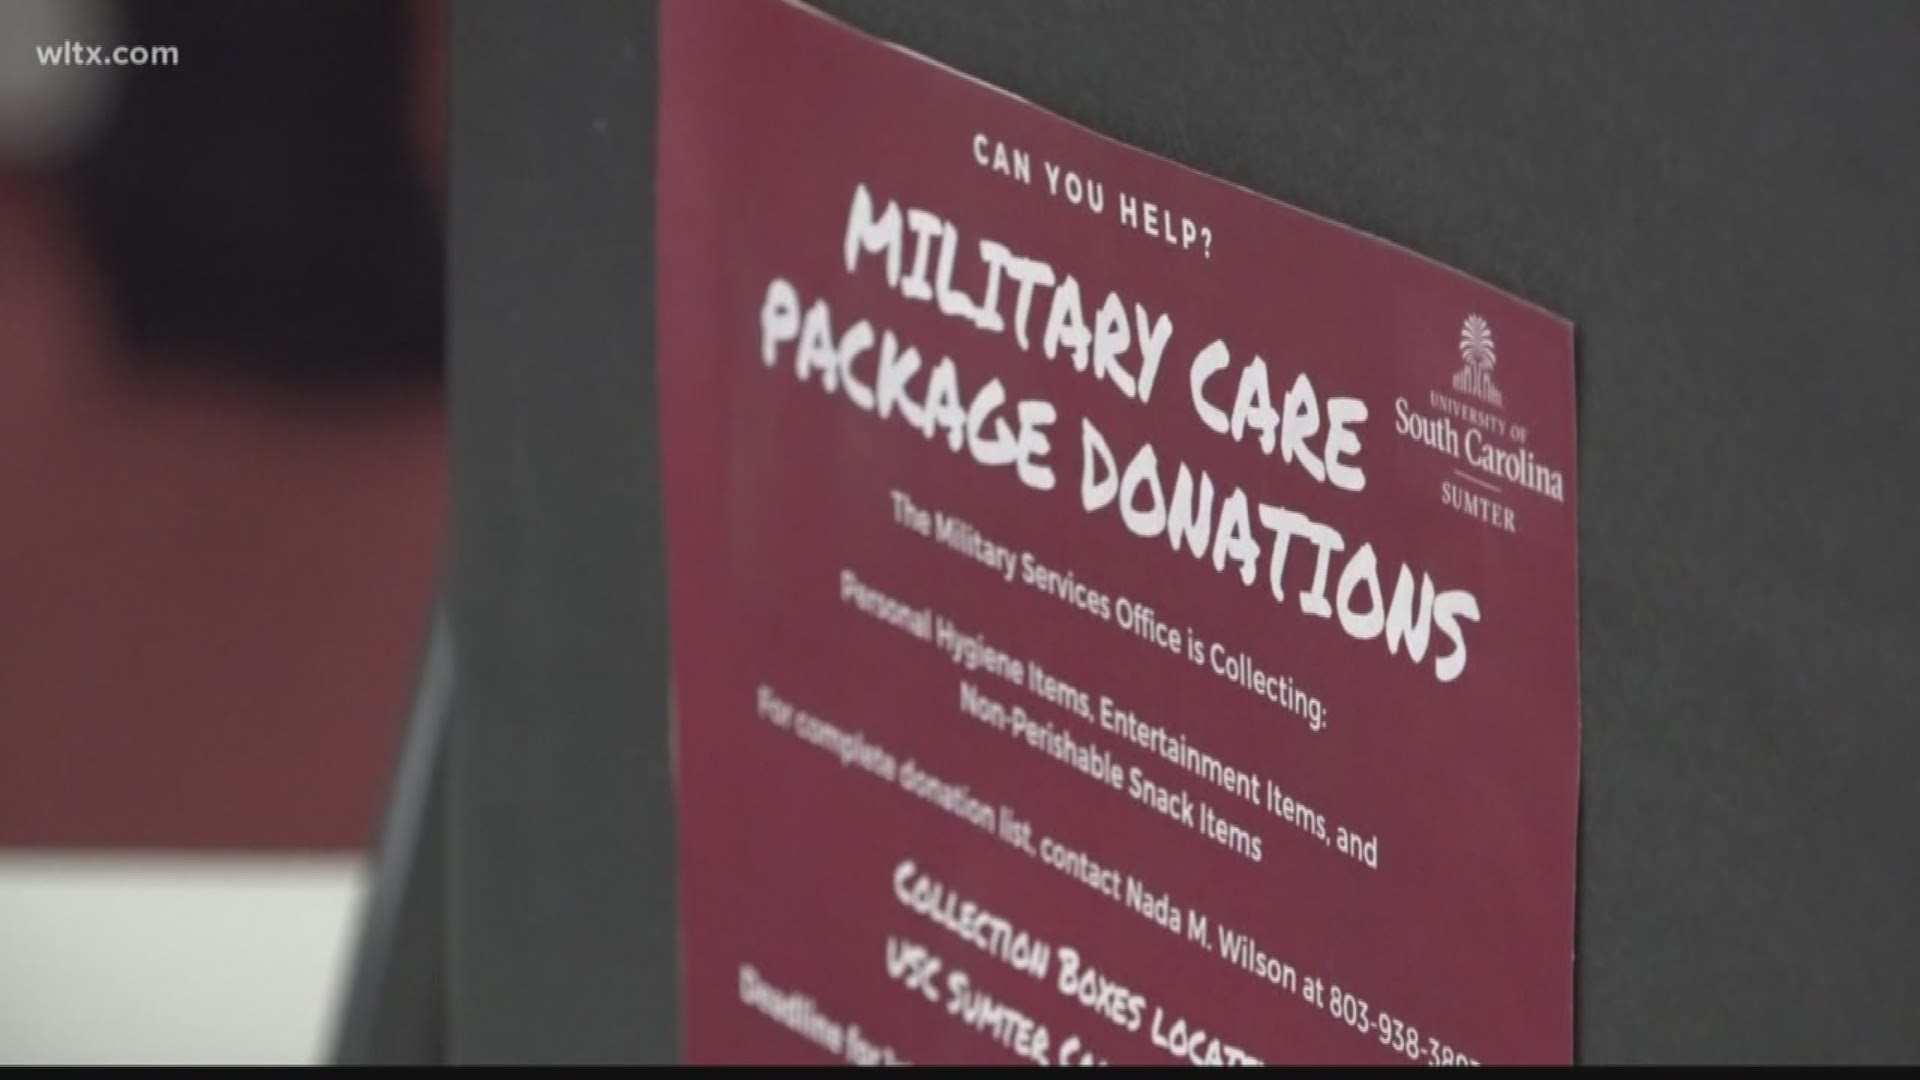 Students at USC Sumter are creating care packages and they need your help.